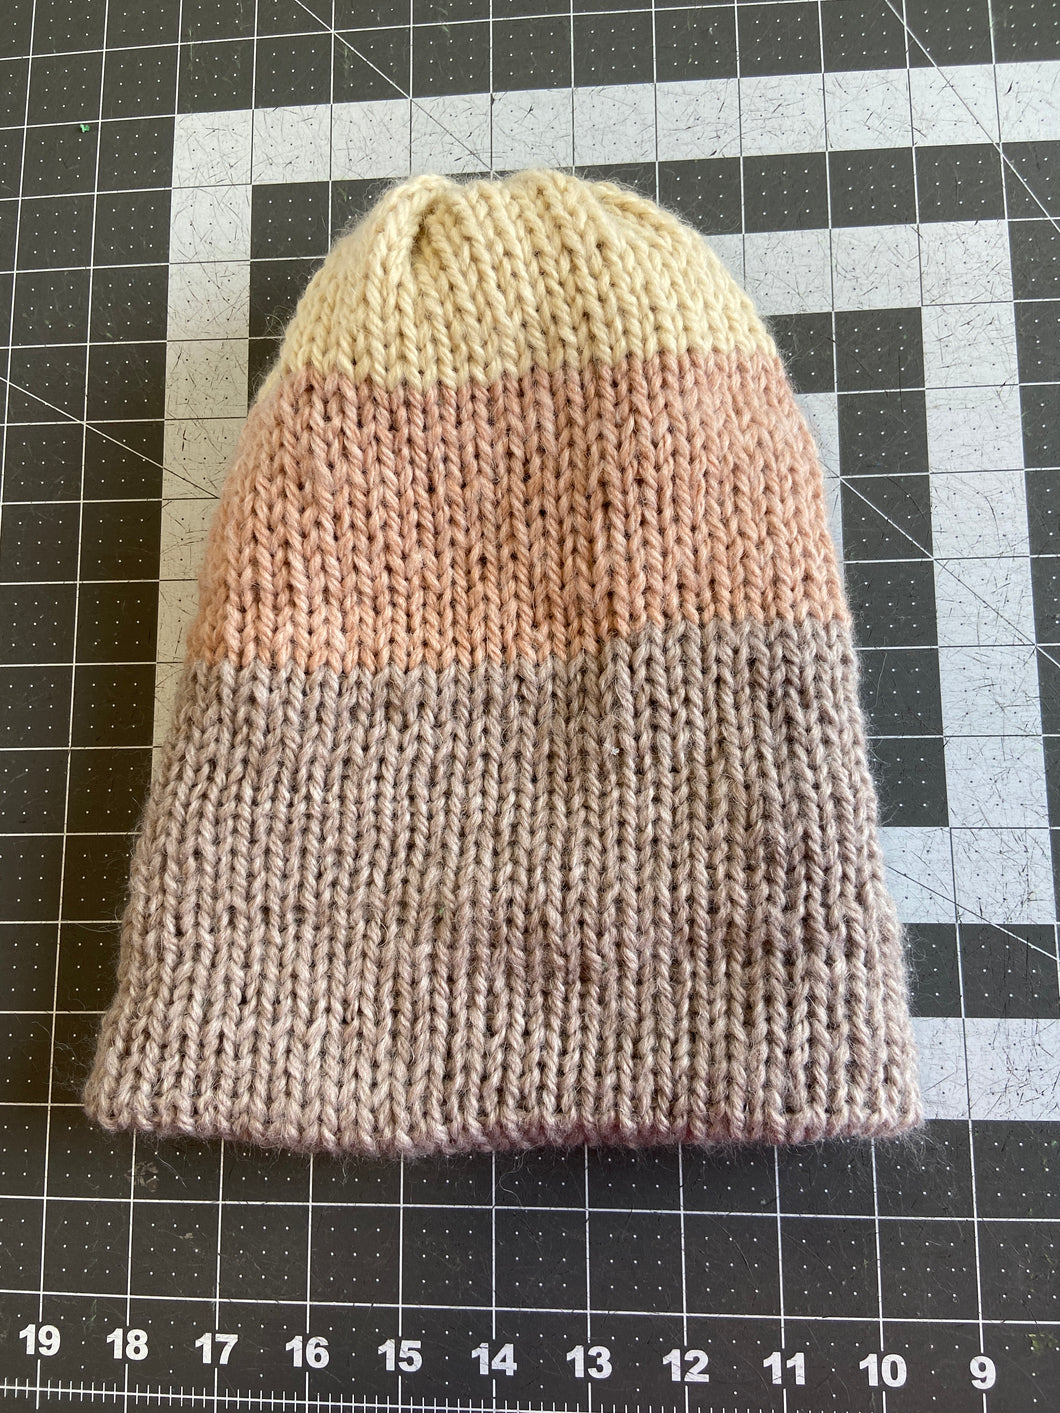 Adult size Beanie-Ready to ship